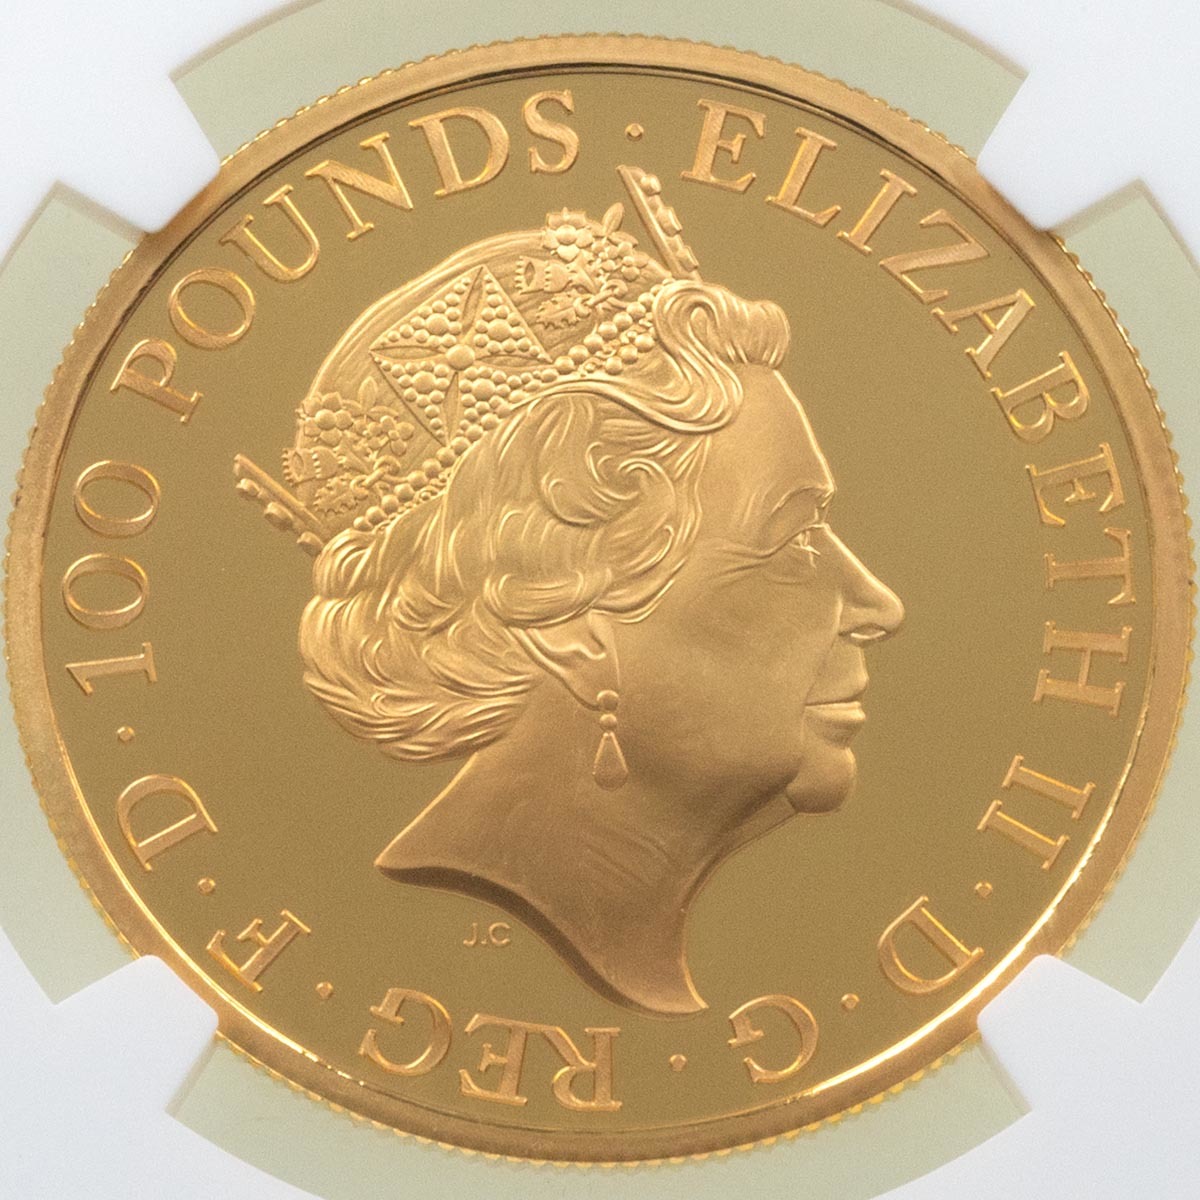 UK20QHGP 2020 Queen's Beasts White Horse Of Hanover One Ounce Gold Proof Coin NGC Graded PF 69 Ultra Cameo Obverse